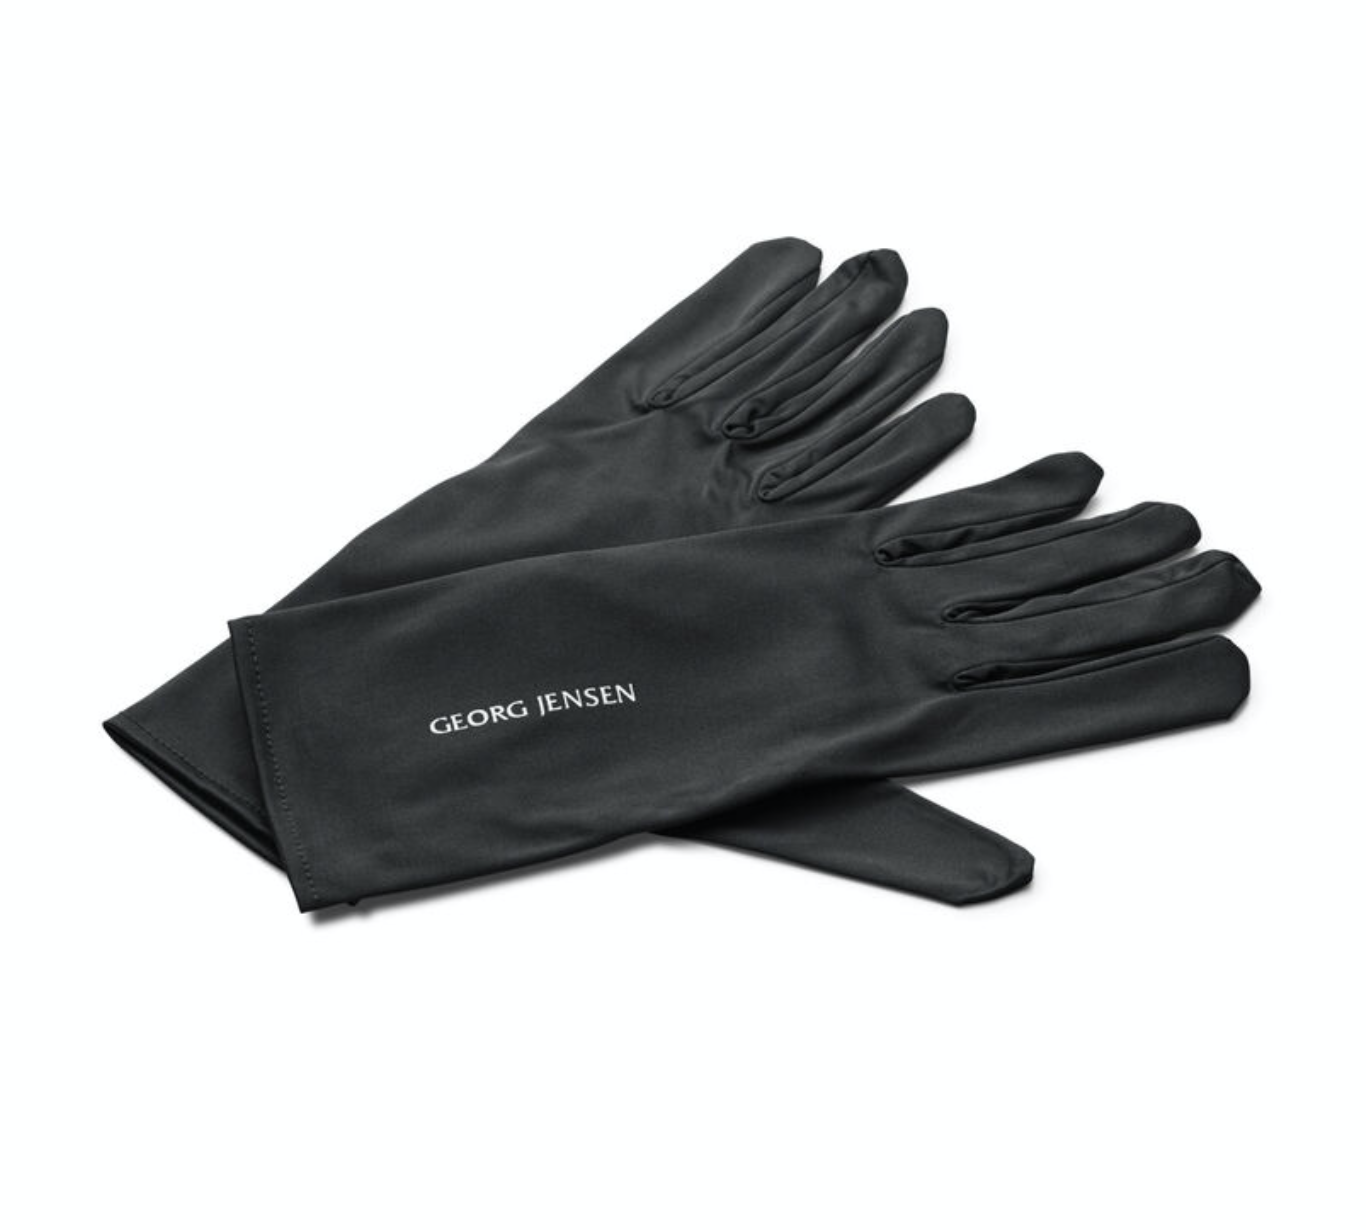 POLISHING gloves for glass, steel, silver one size (s-m)